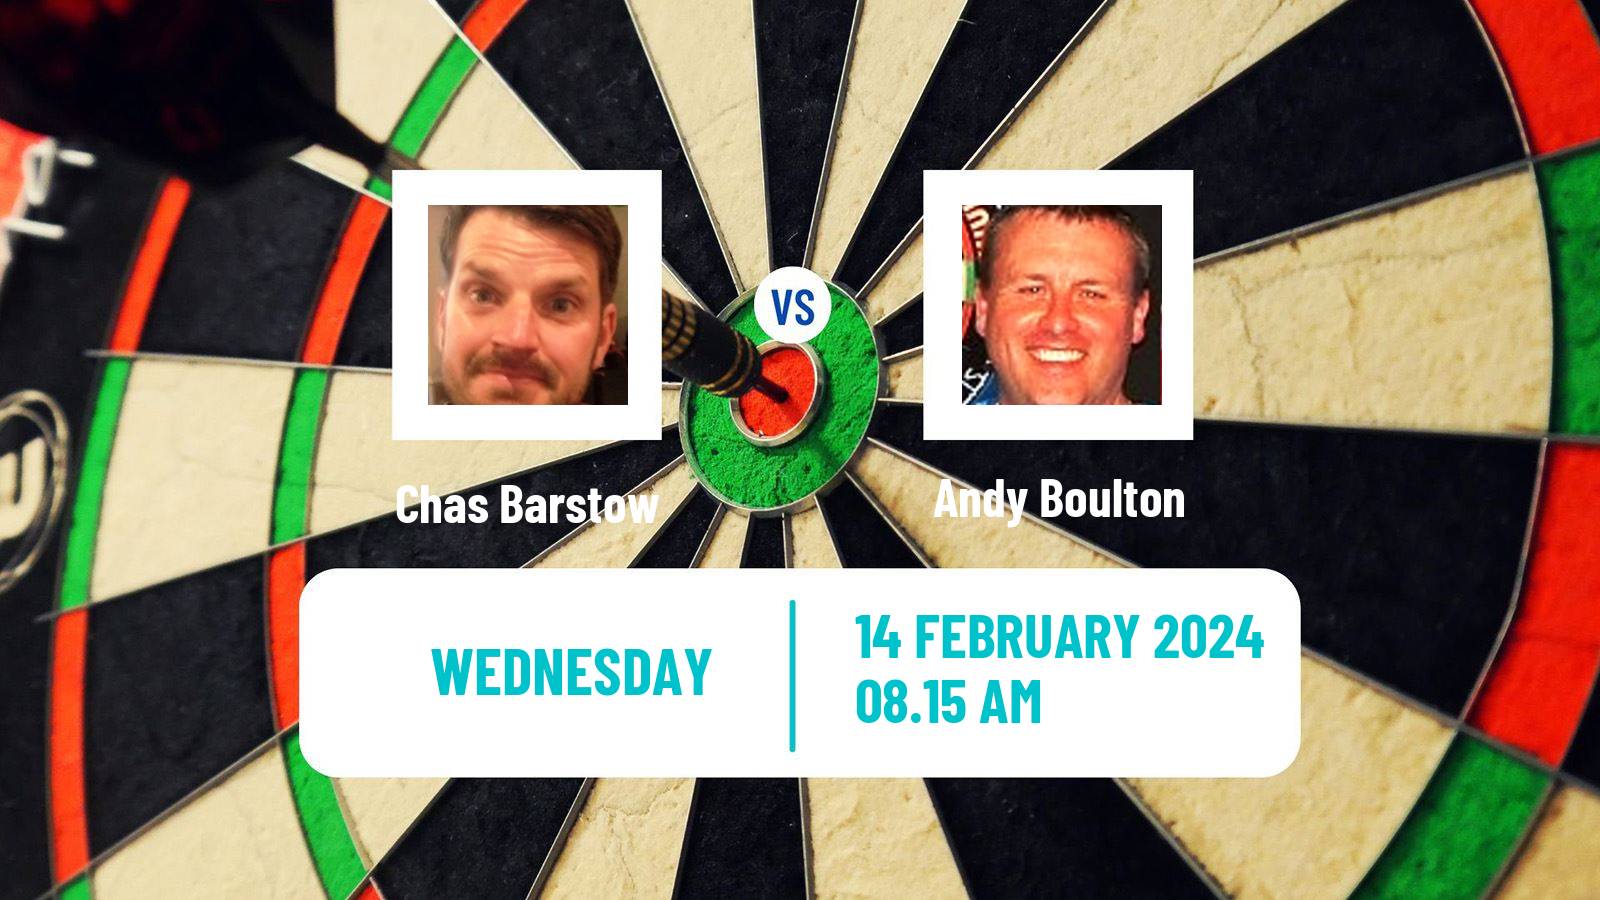 Darts Modus Super Series Chas Barstow - Andy Boulton